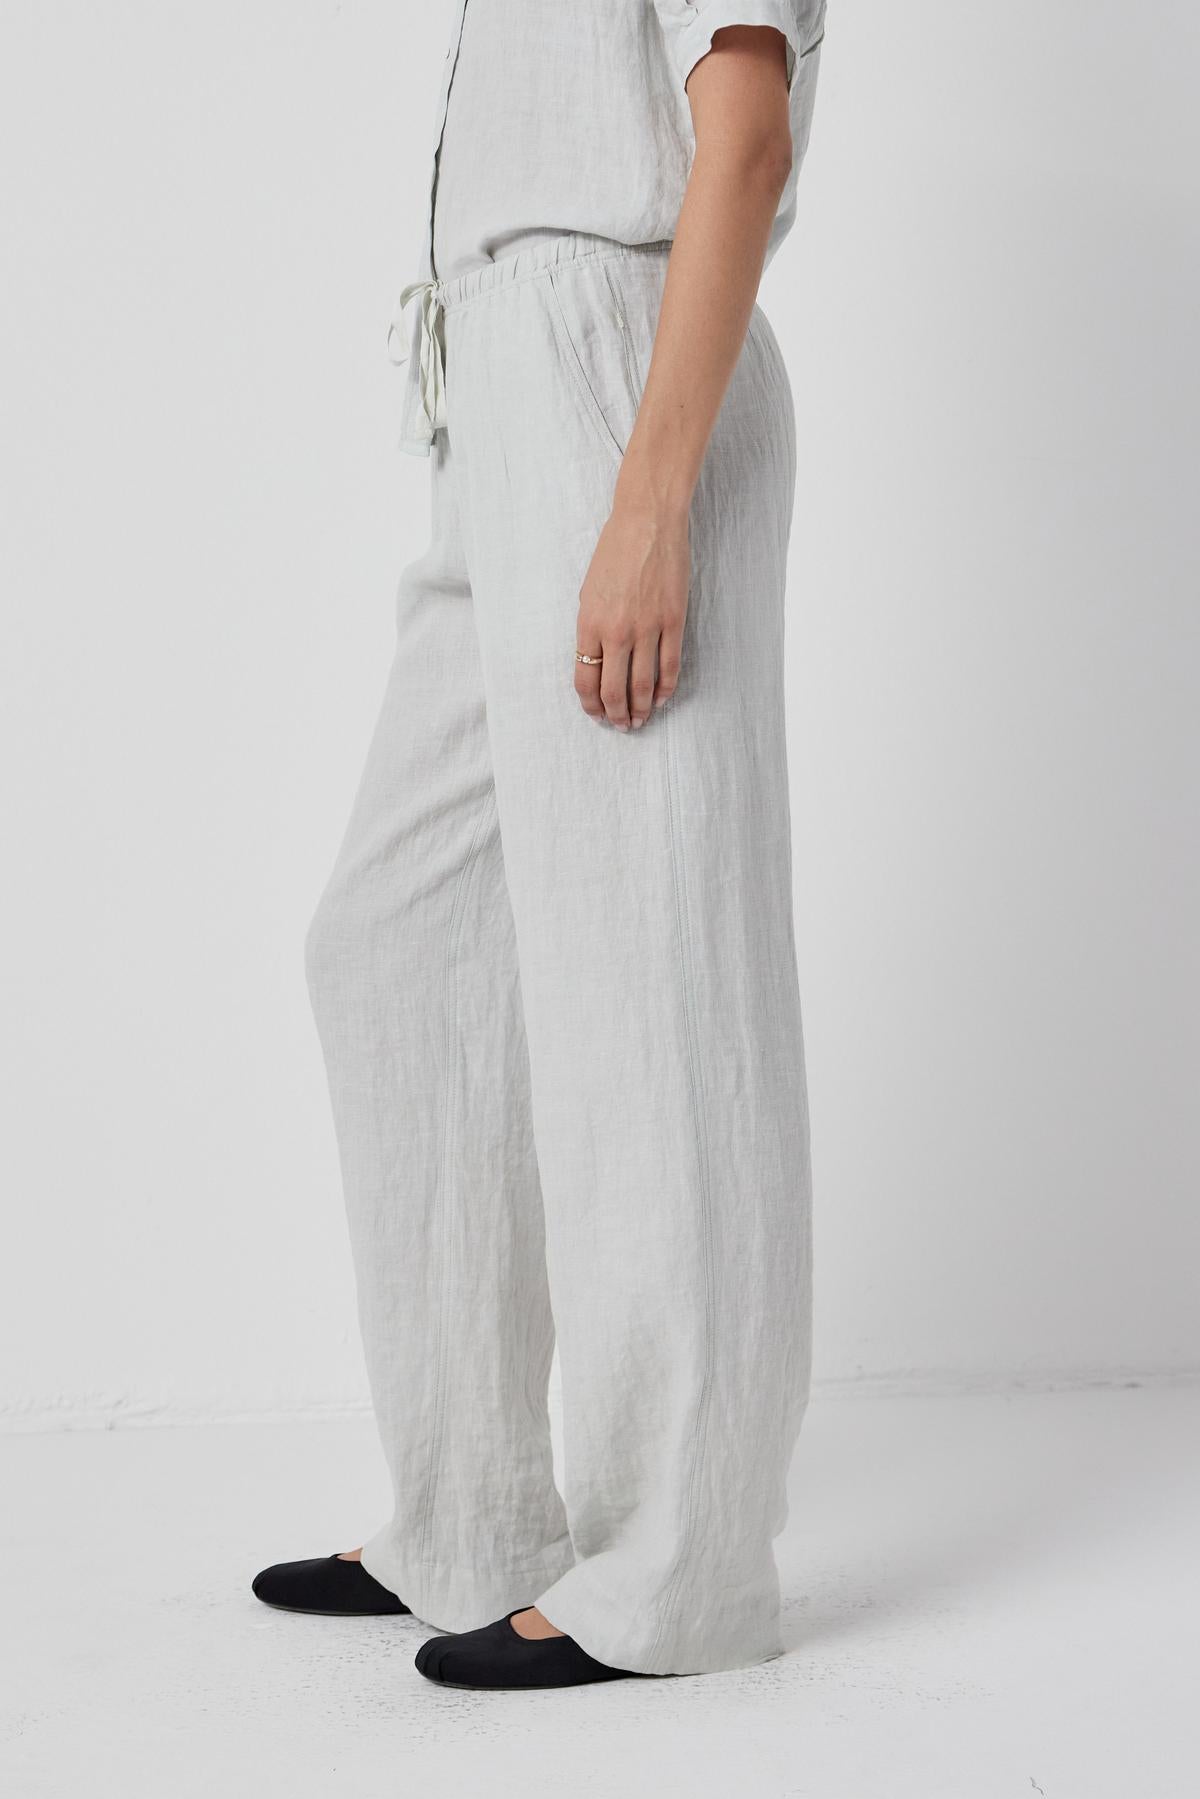   The model is dressed in a relaxed fit white linen PICO PANT jumpsuit with elastic waist by Velvet by Jenny Graham. 